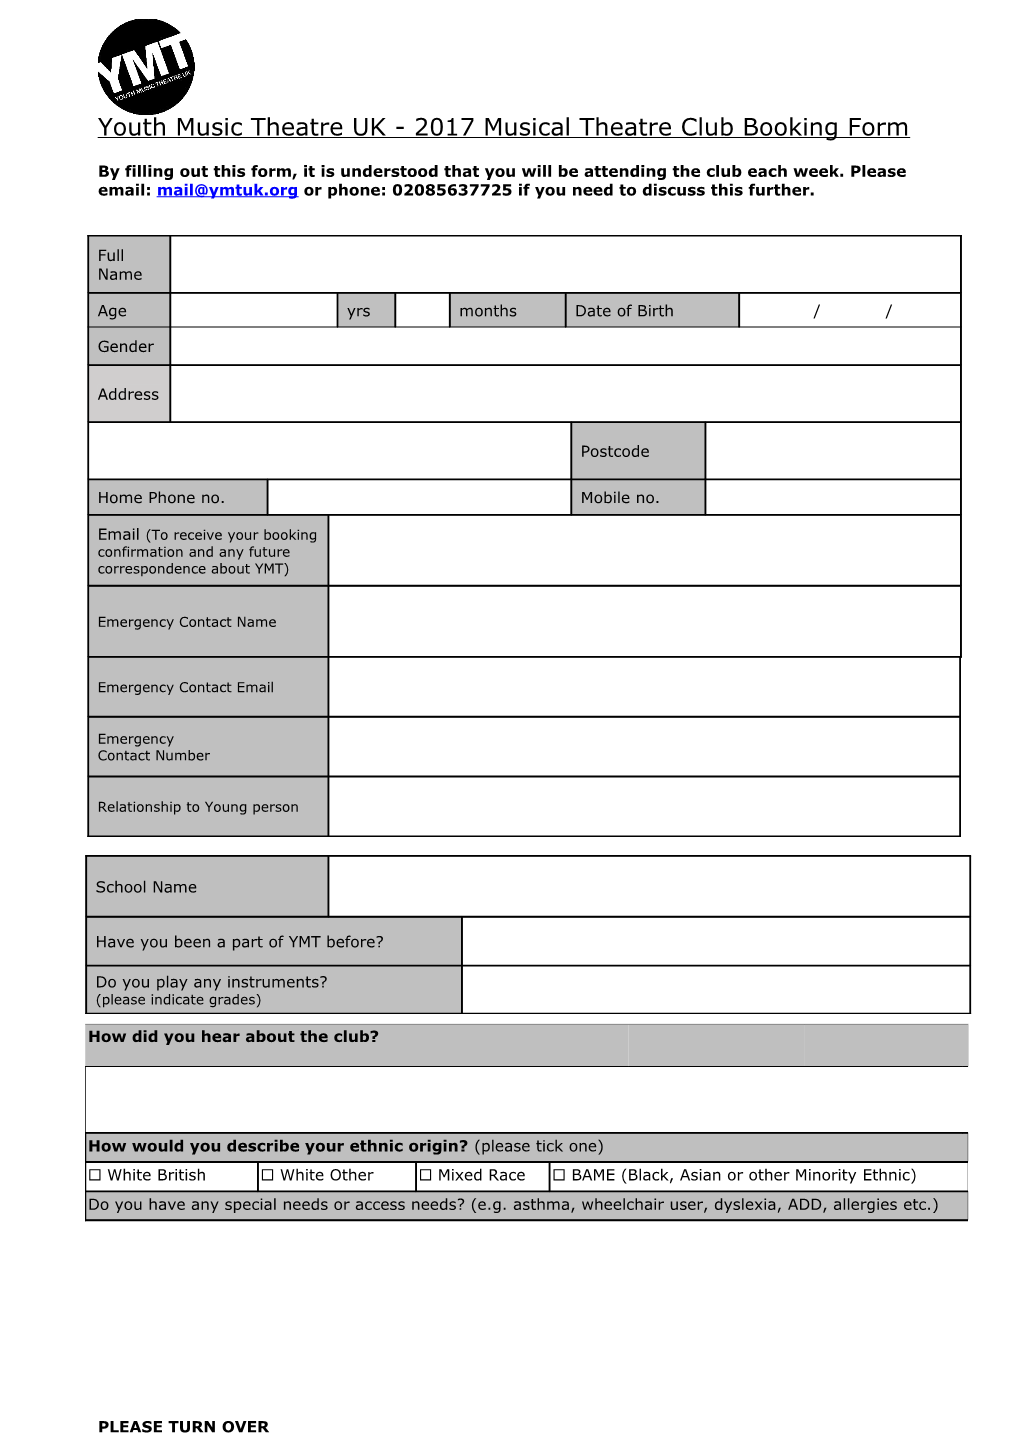 Youth Music Theatre UK - 2017Musical Theatre Club Booking Form